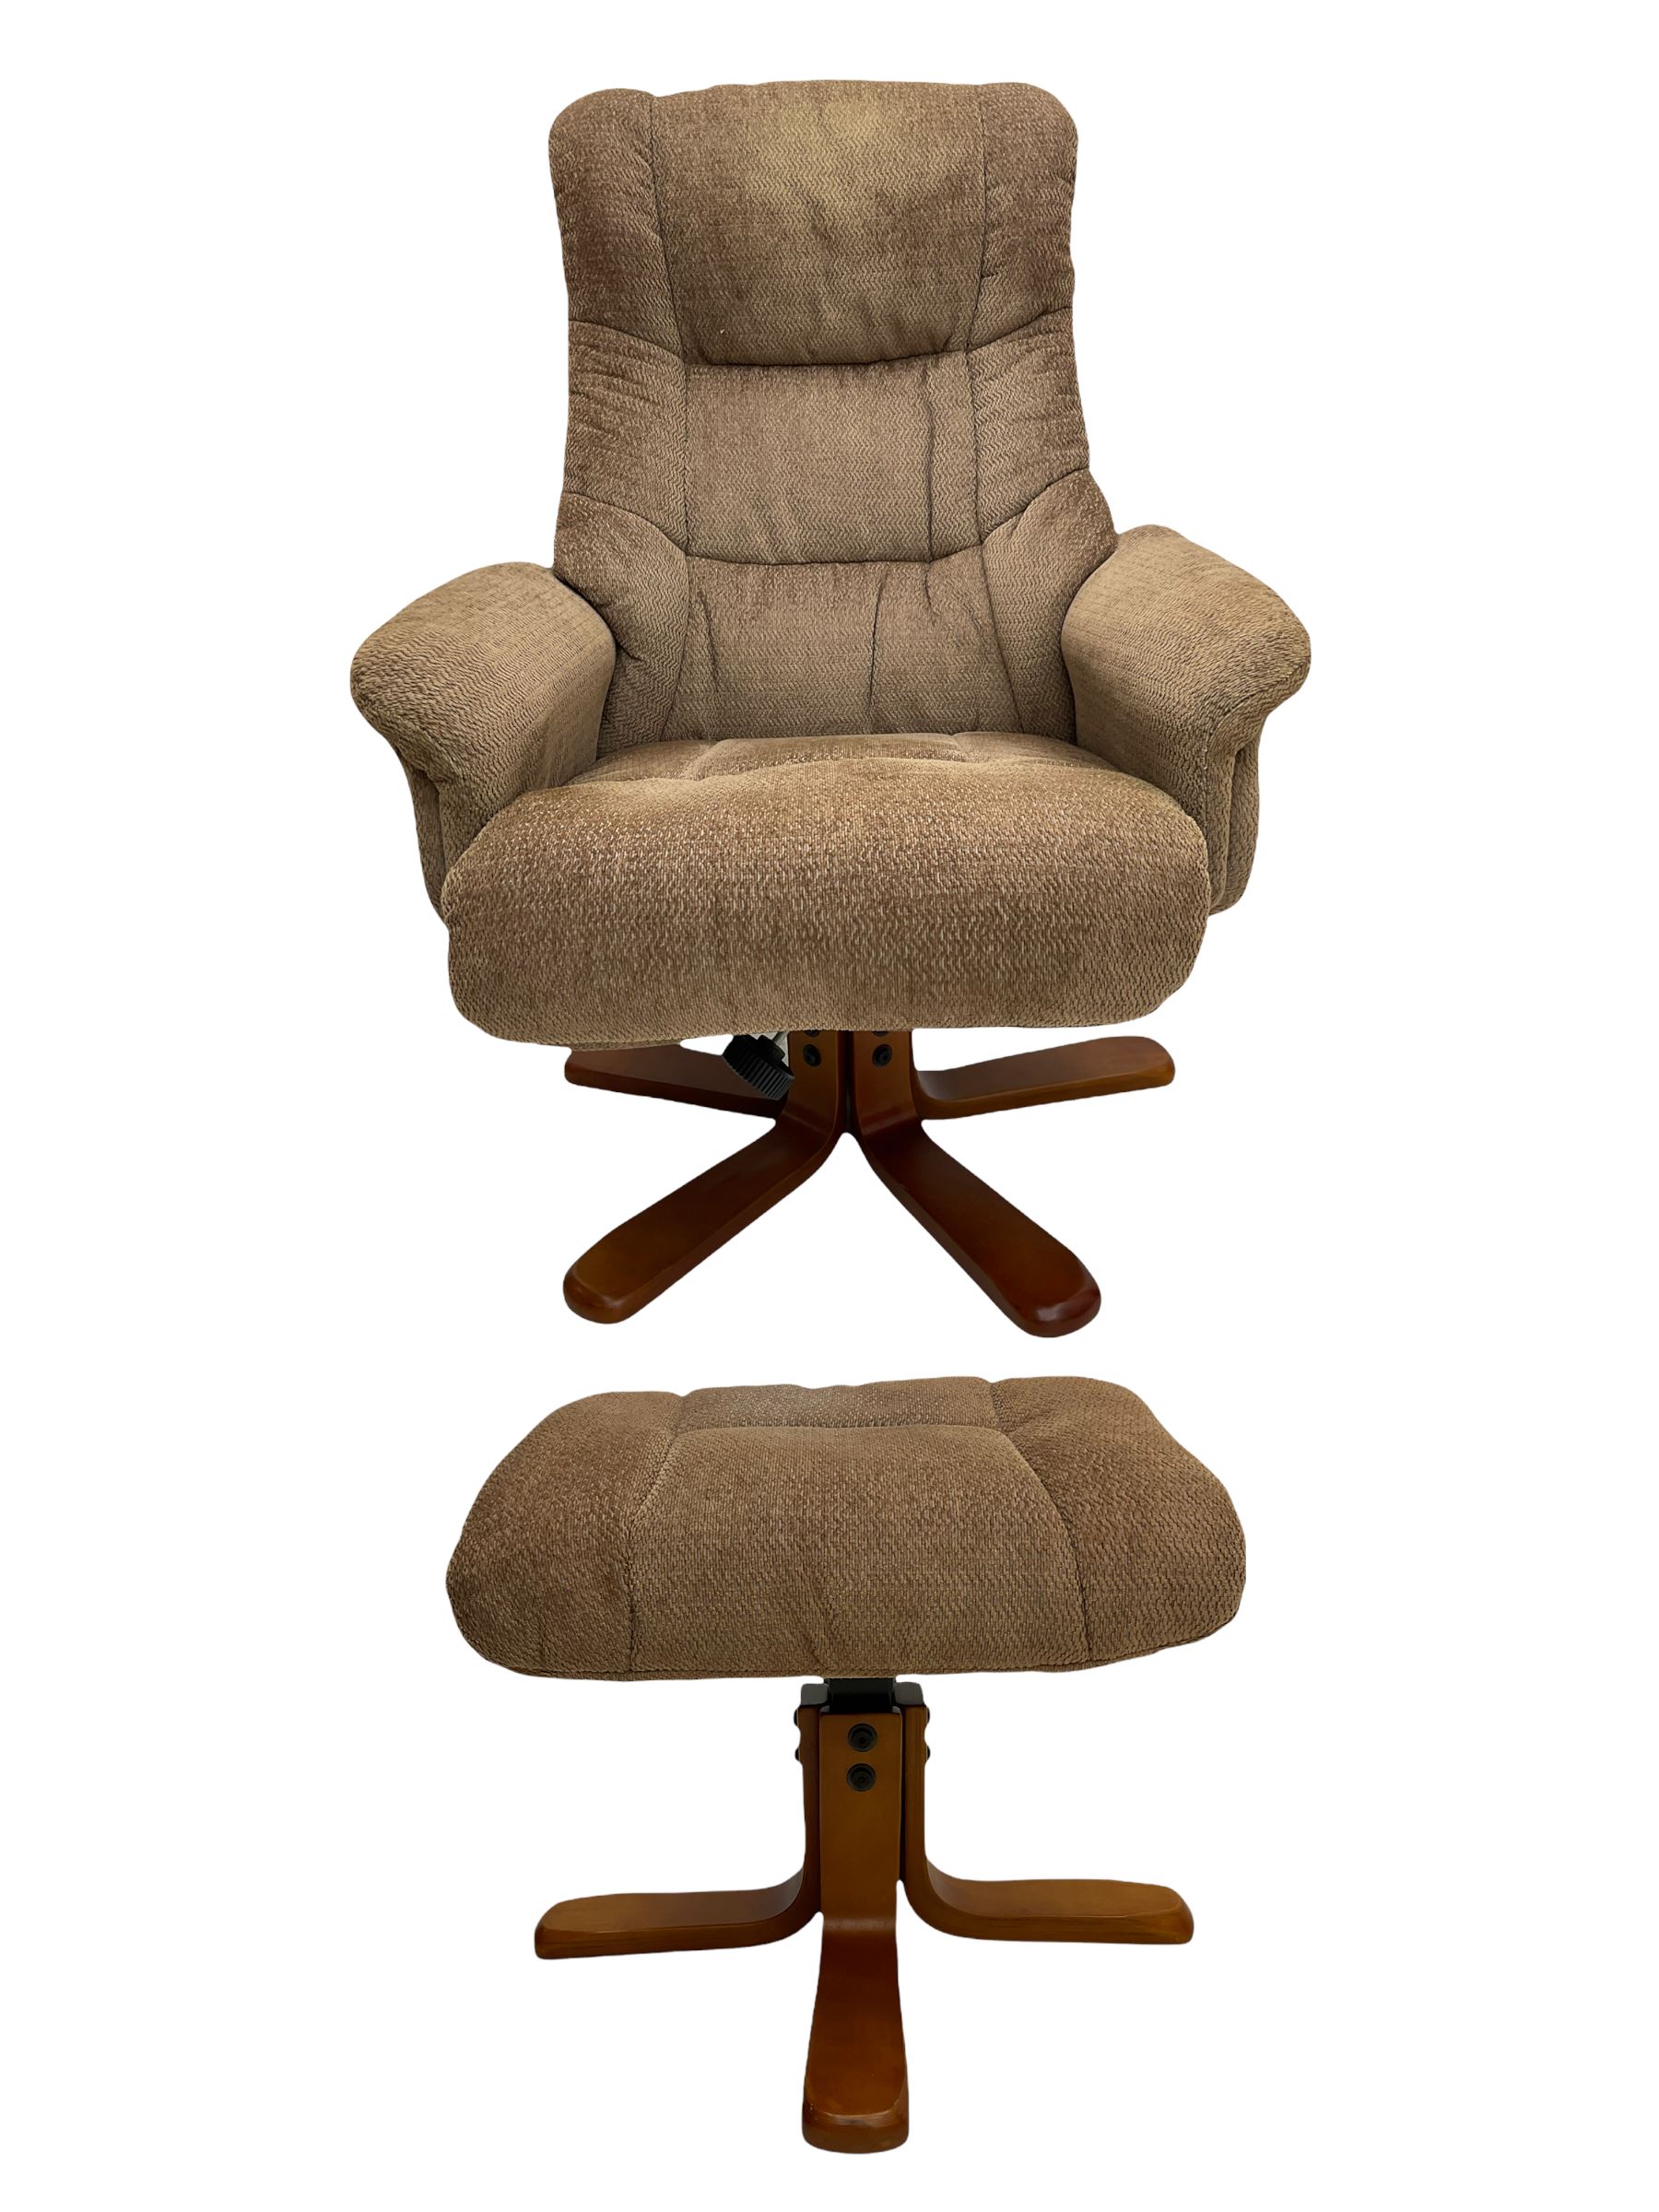 Contemporary lounge chair with matching footstool - Image 2 of 14